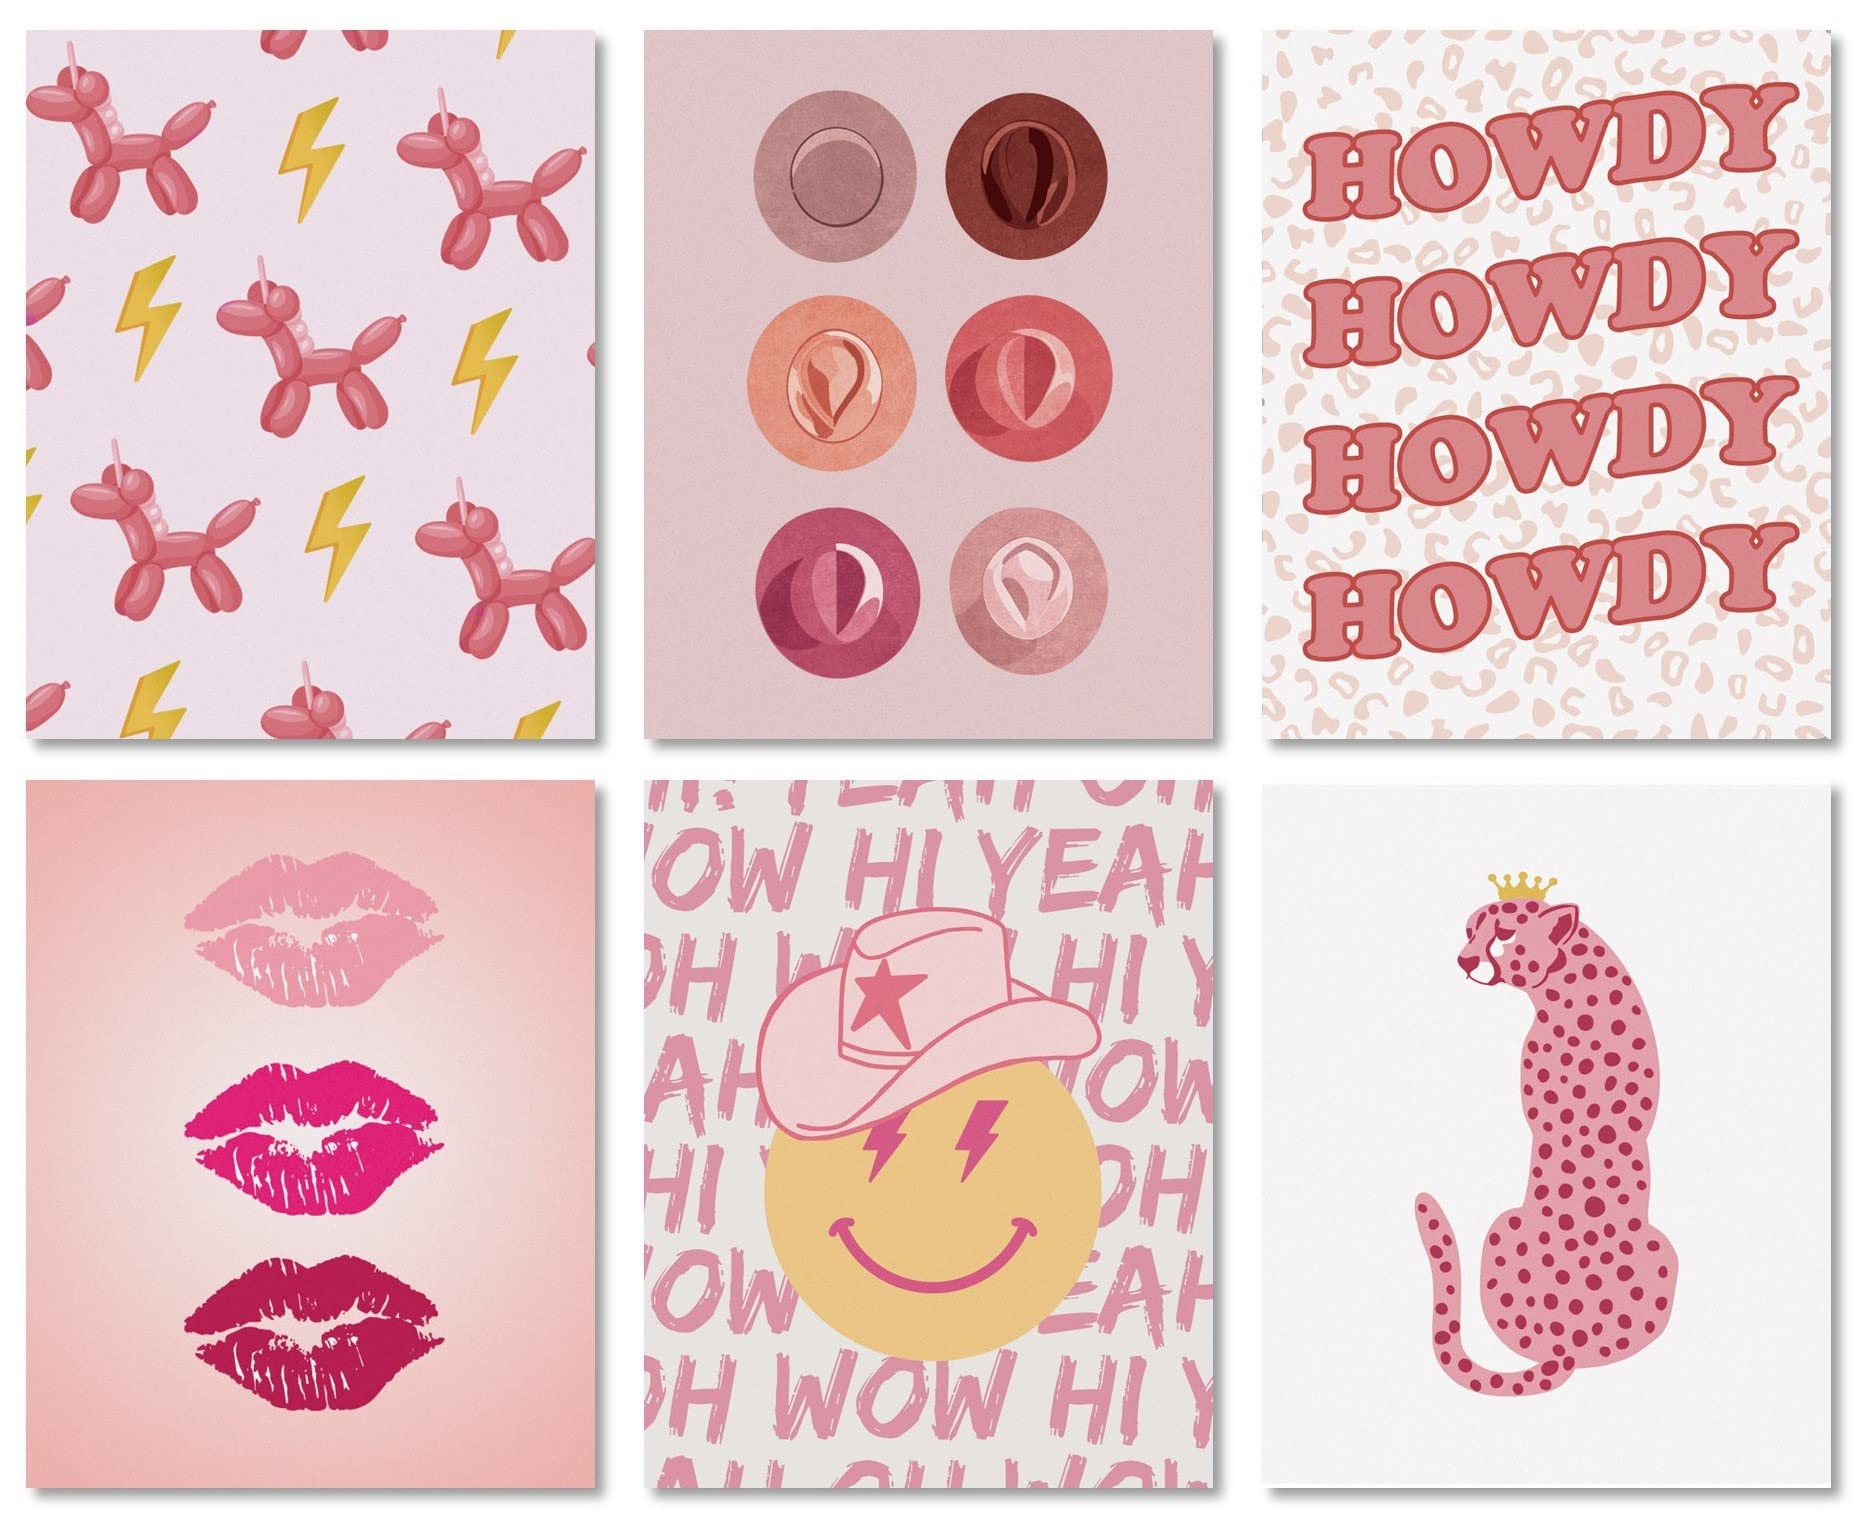 MINI ZOZI Preppy Room Decor Light Pink Posters 6PCS 8X10 UNFRAMED Aesthetic Trendy Girls Dorms Wall Art Decoration Hot Teen Cute Leopard Cheetah Prints Lips Cowgirl Hat Howdy Smiley Face Balloon